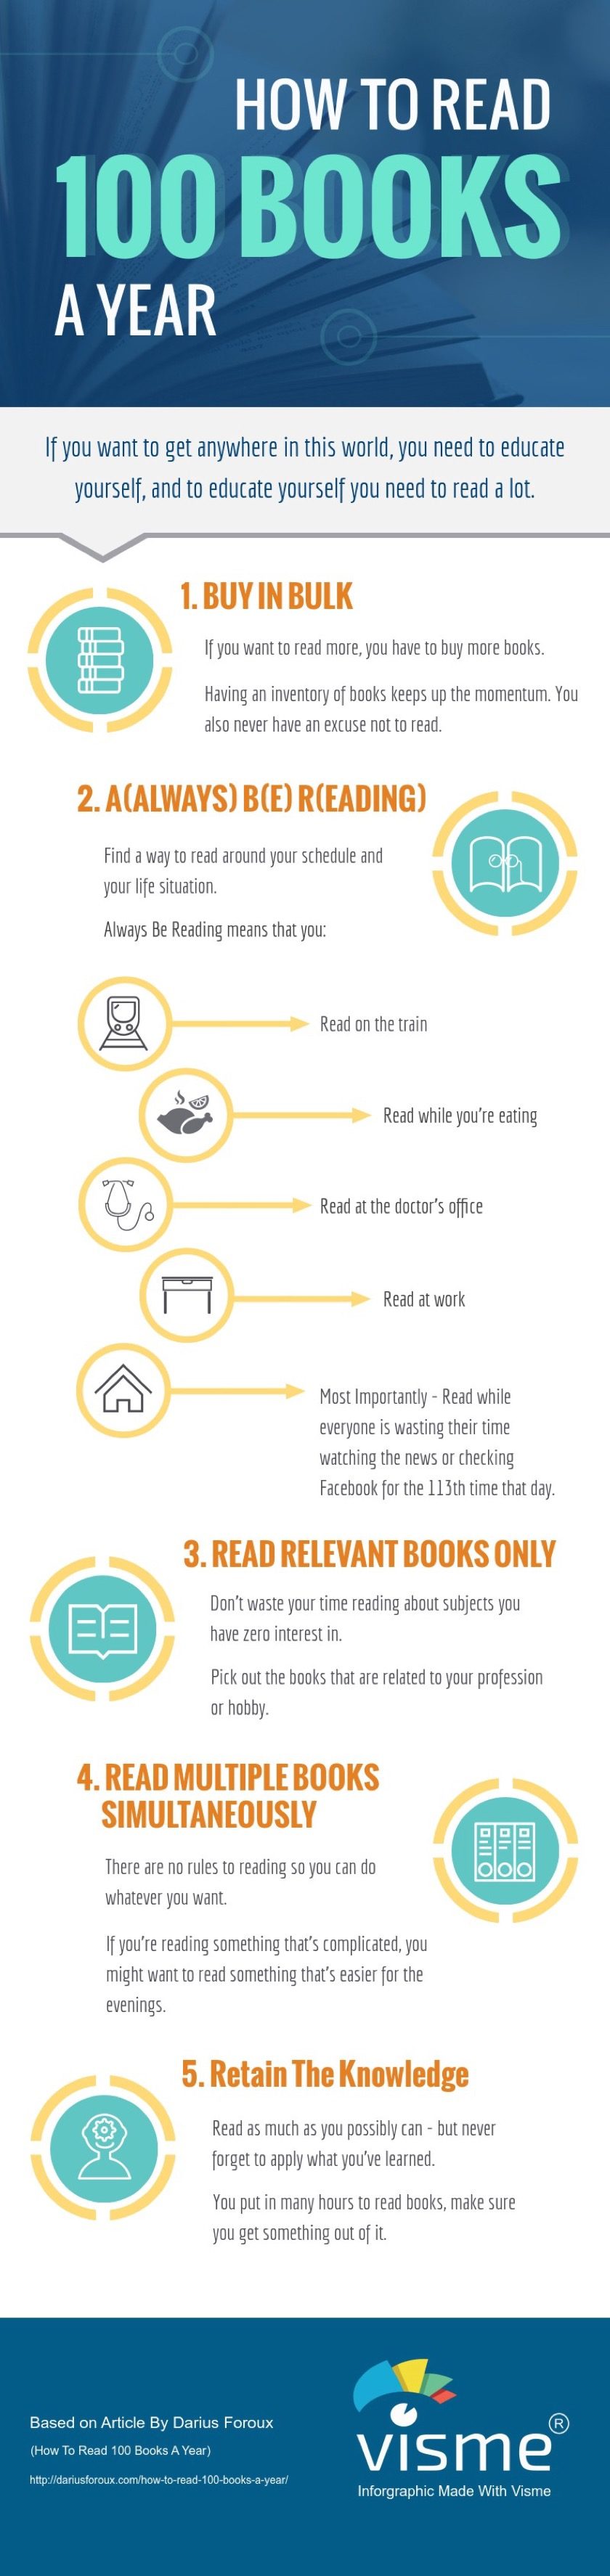 5 tips to read 100 #books a year #infographic